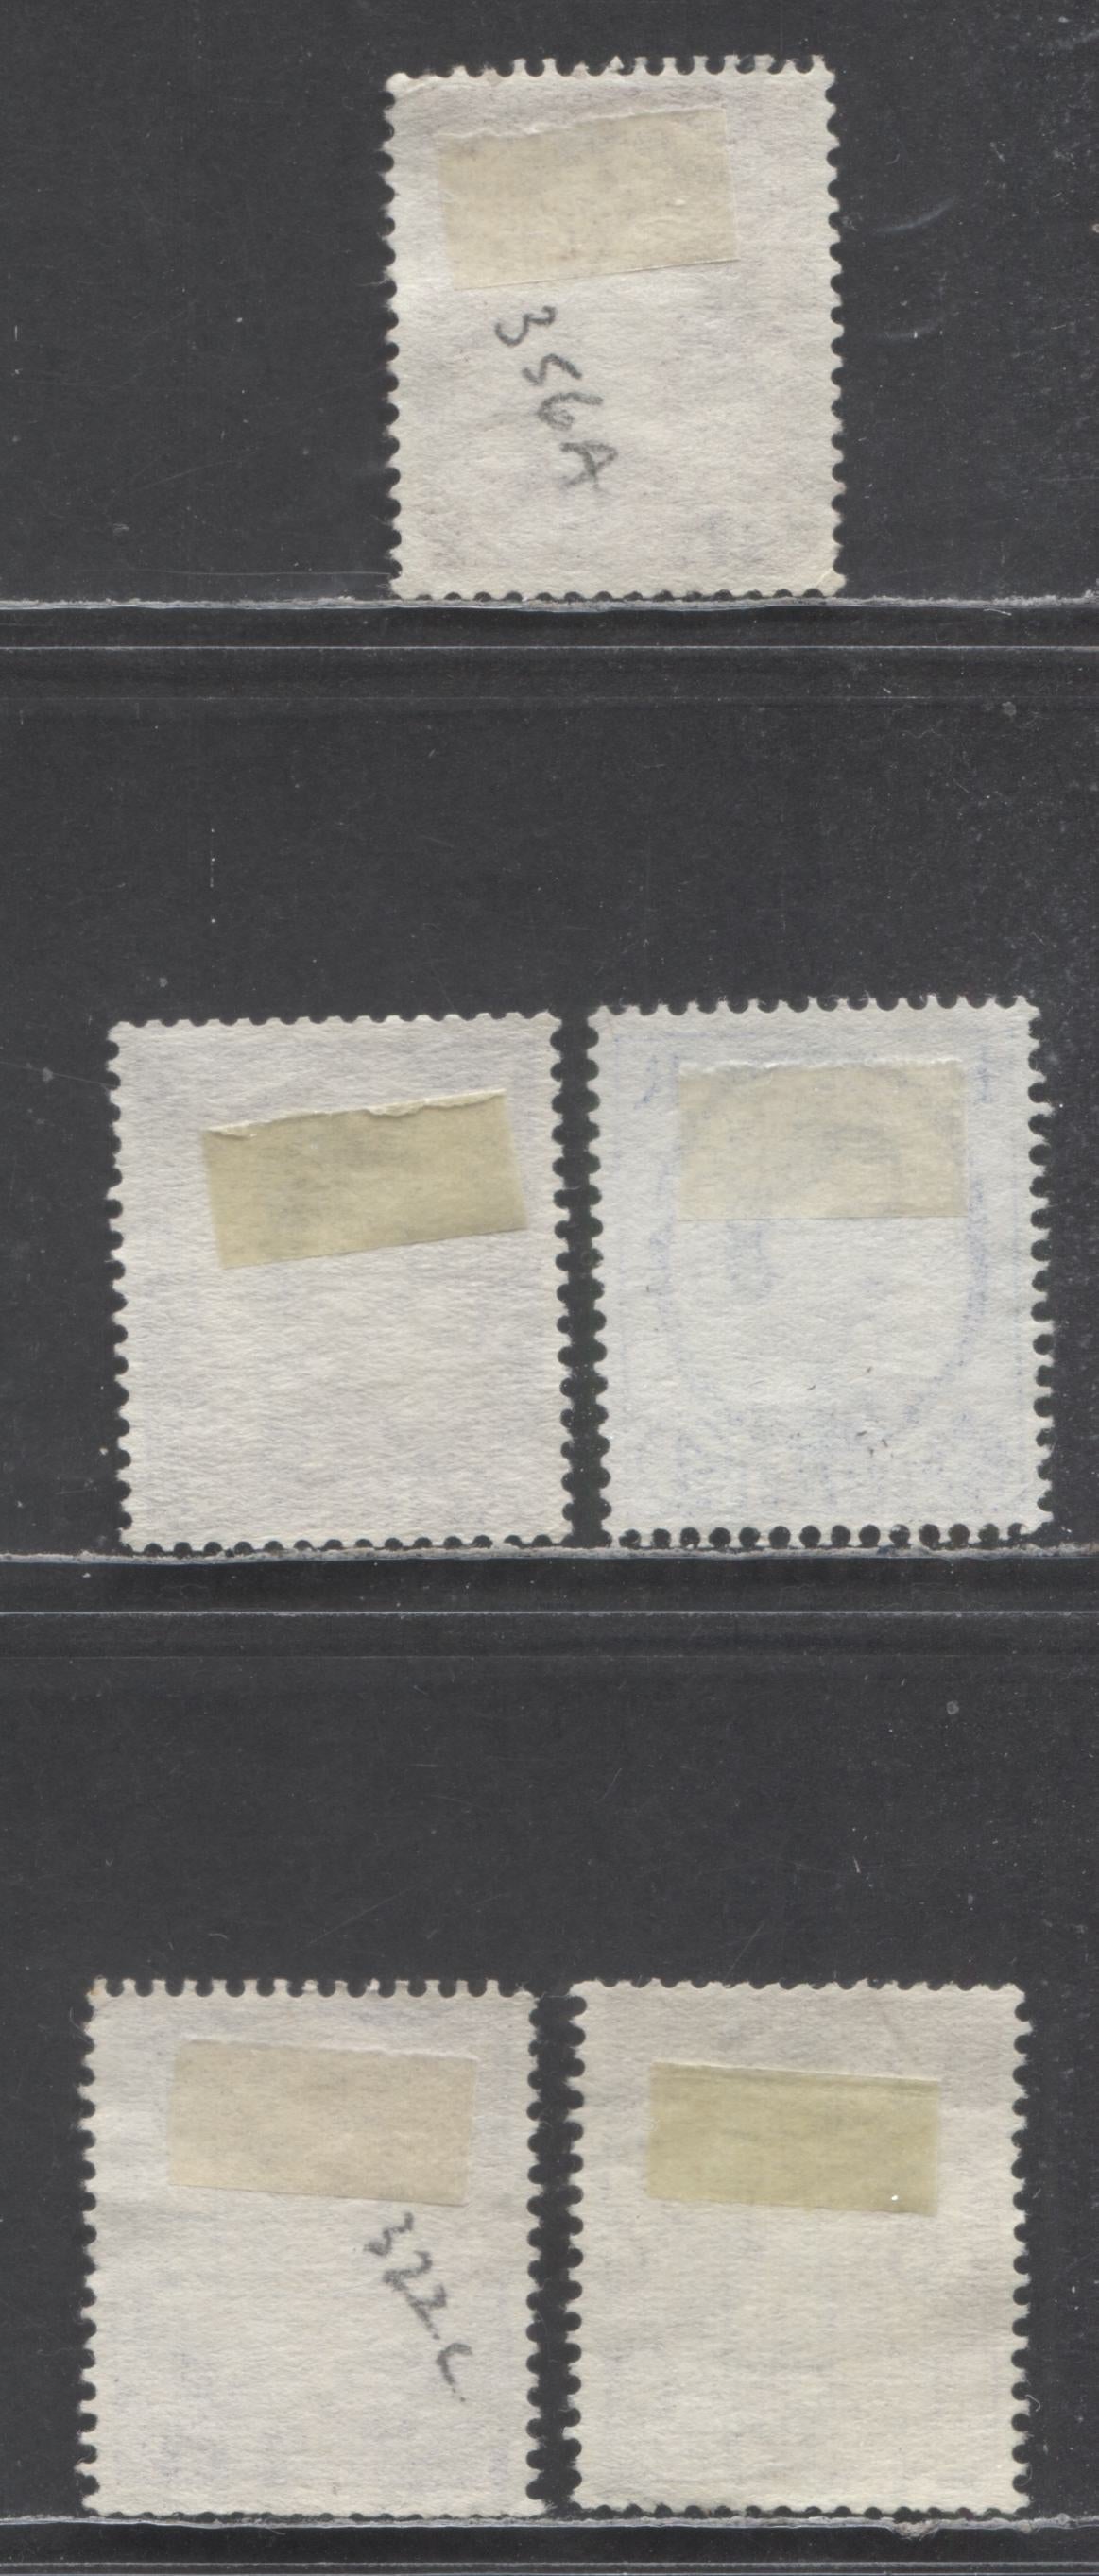 Lot 9 Great Britain SG#543d (SC# 320a)/545b (SC# 359d) 1955-1959 Pictorial Definitives, Tudor Crown Sideways & Multiple Crown Sideways Wmk, 5 Fine Used Singles, Click on Listing to See ALL Pictures, Estimated Value $10